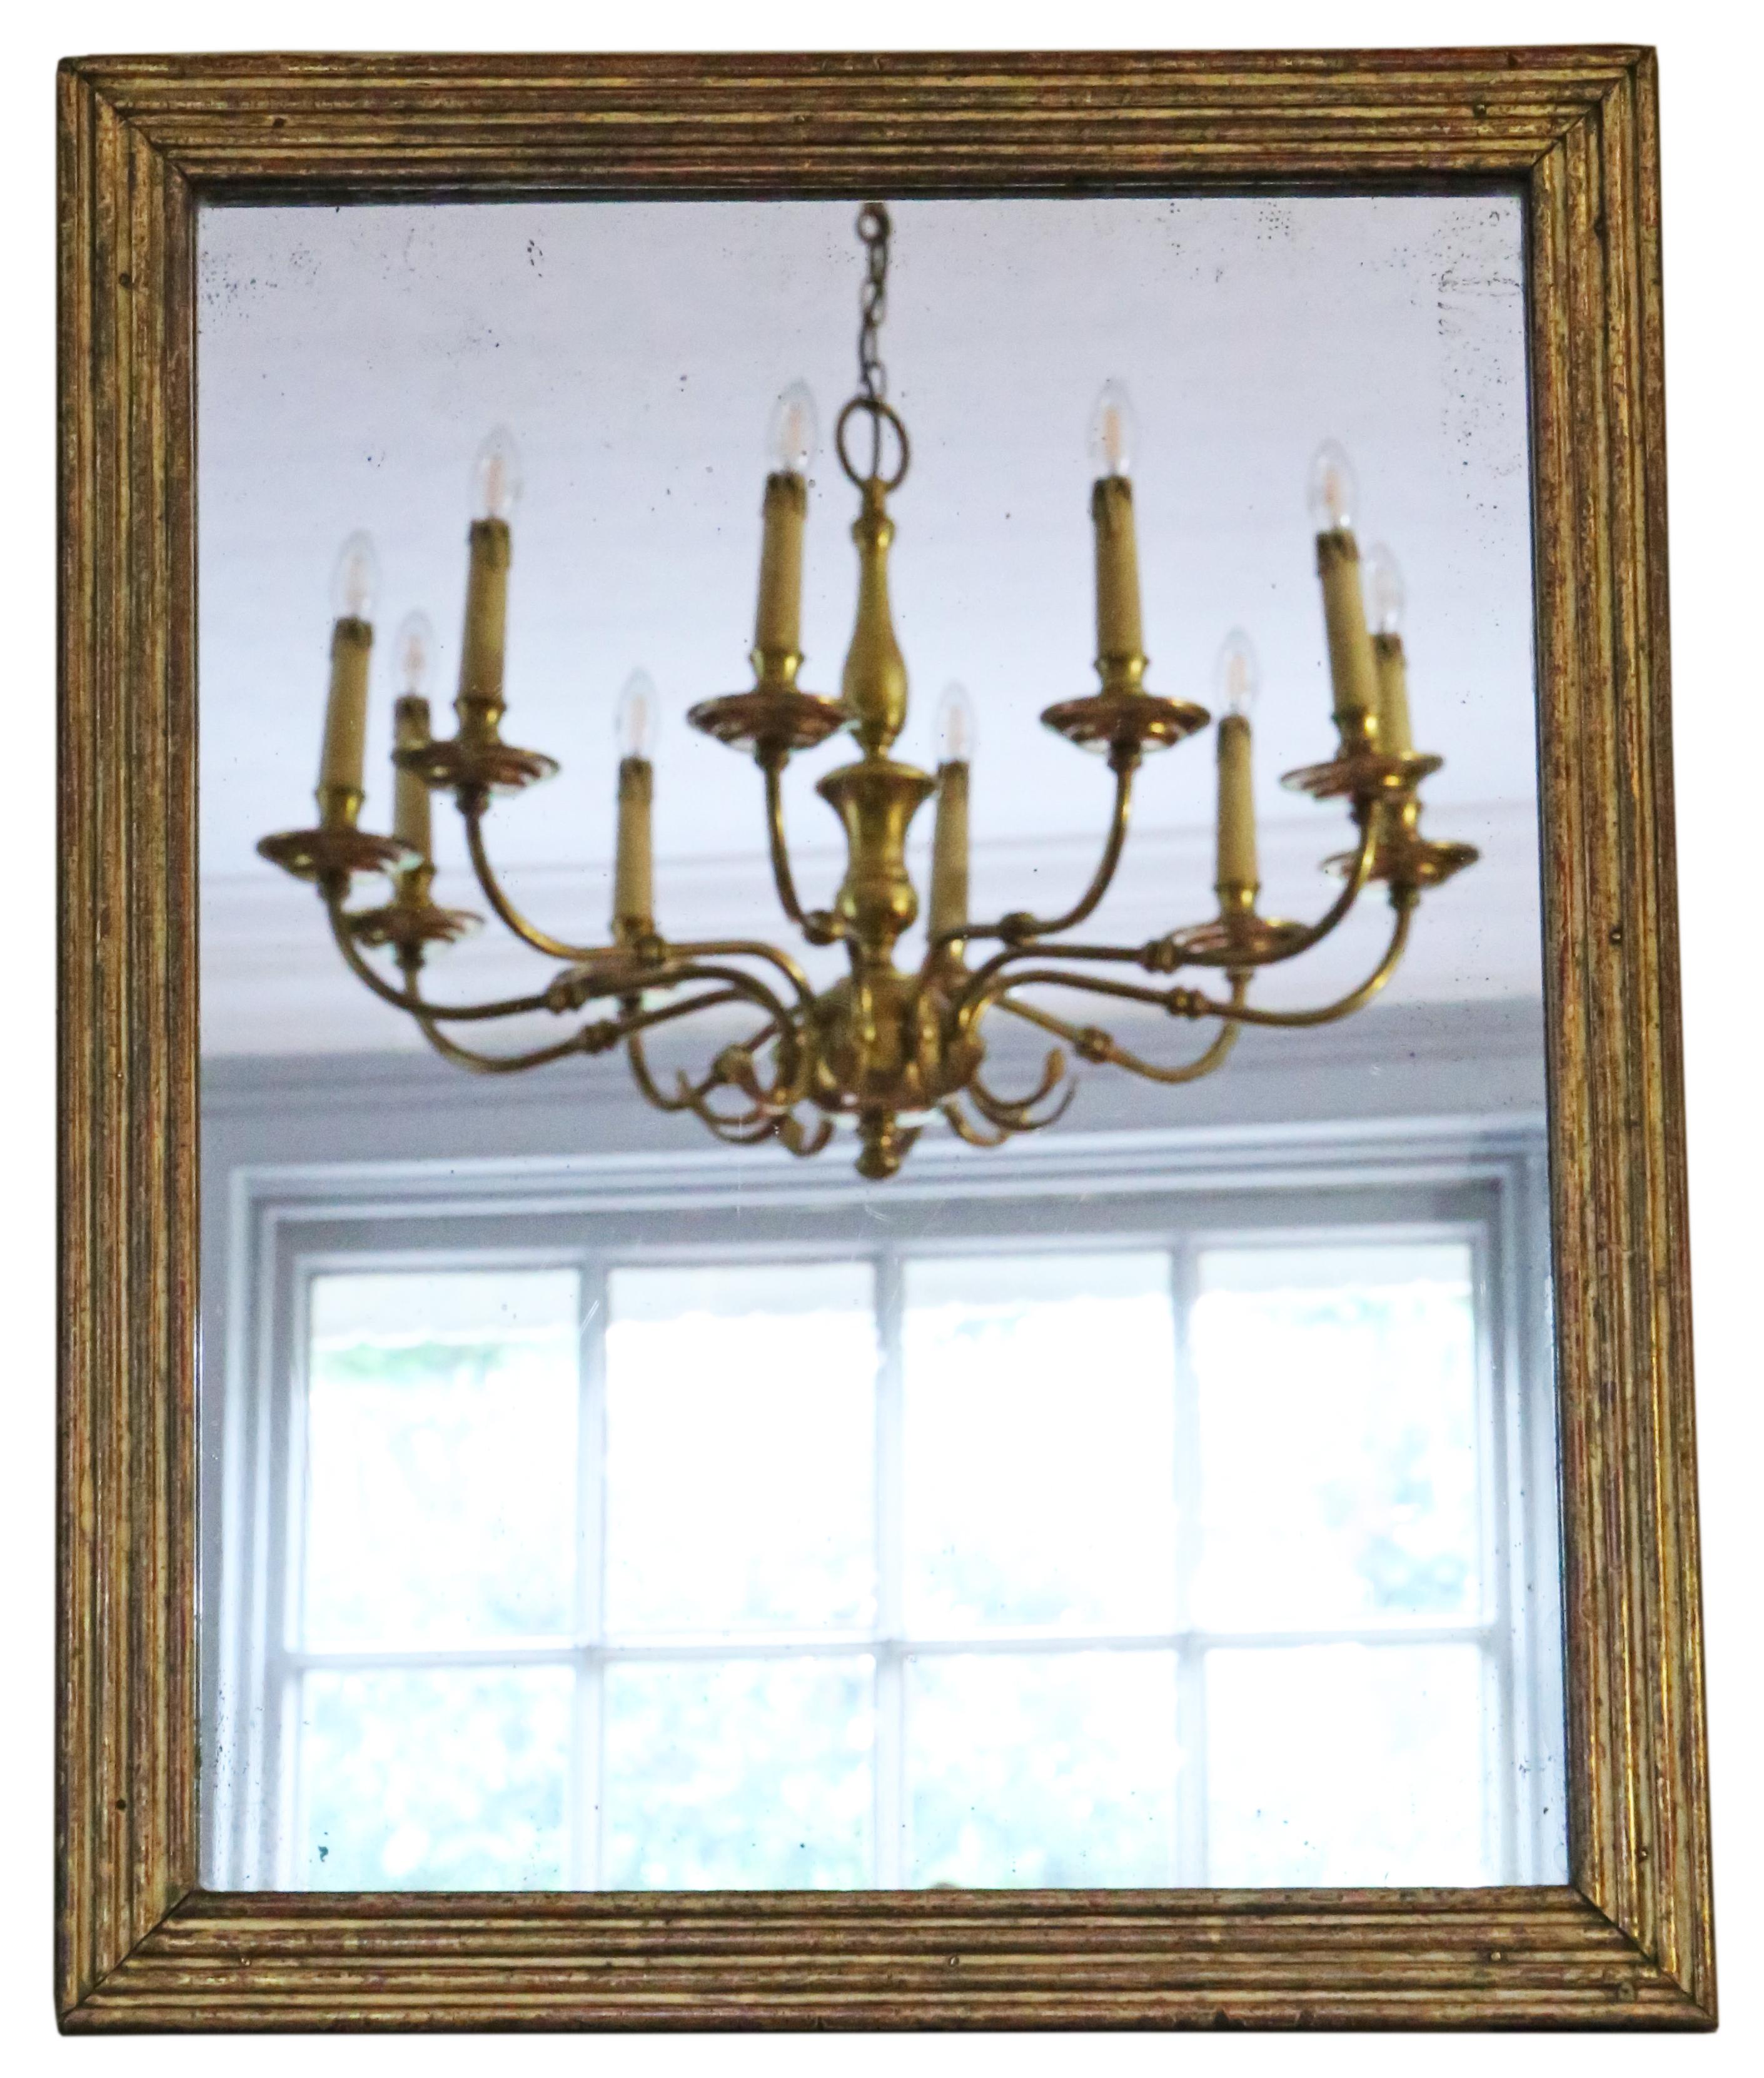 Antique fine quality gilt wall or overmantle mirror, 19th Century.

An impressive rare find, that would look amazing in the right location. No loose joints.

The original mirrored glass has light oxidation and age related imperfections. Original